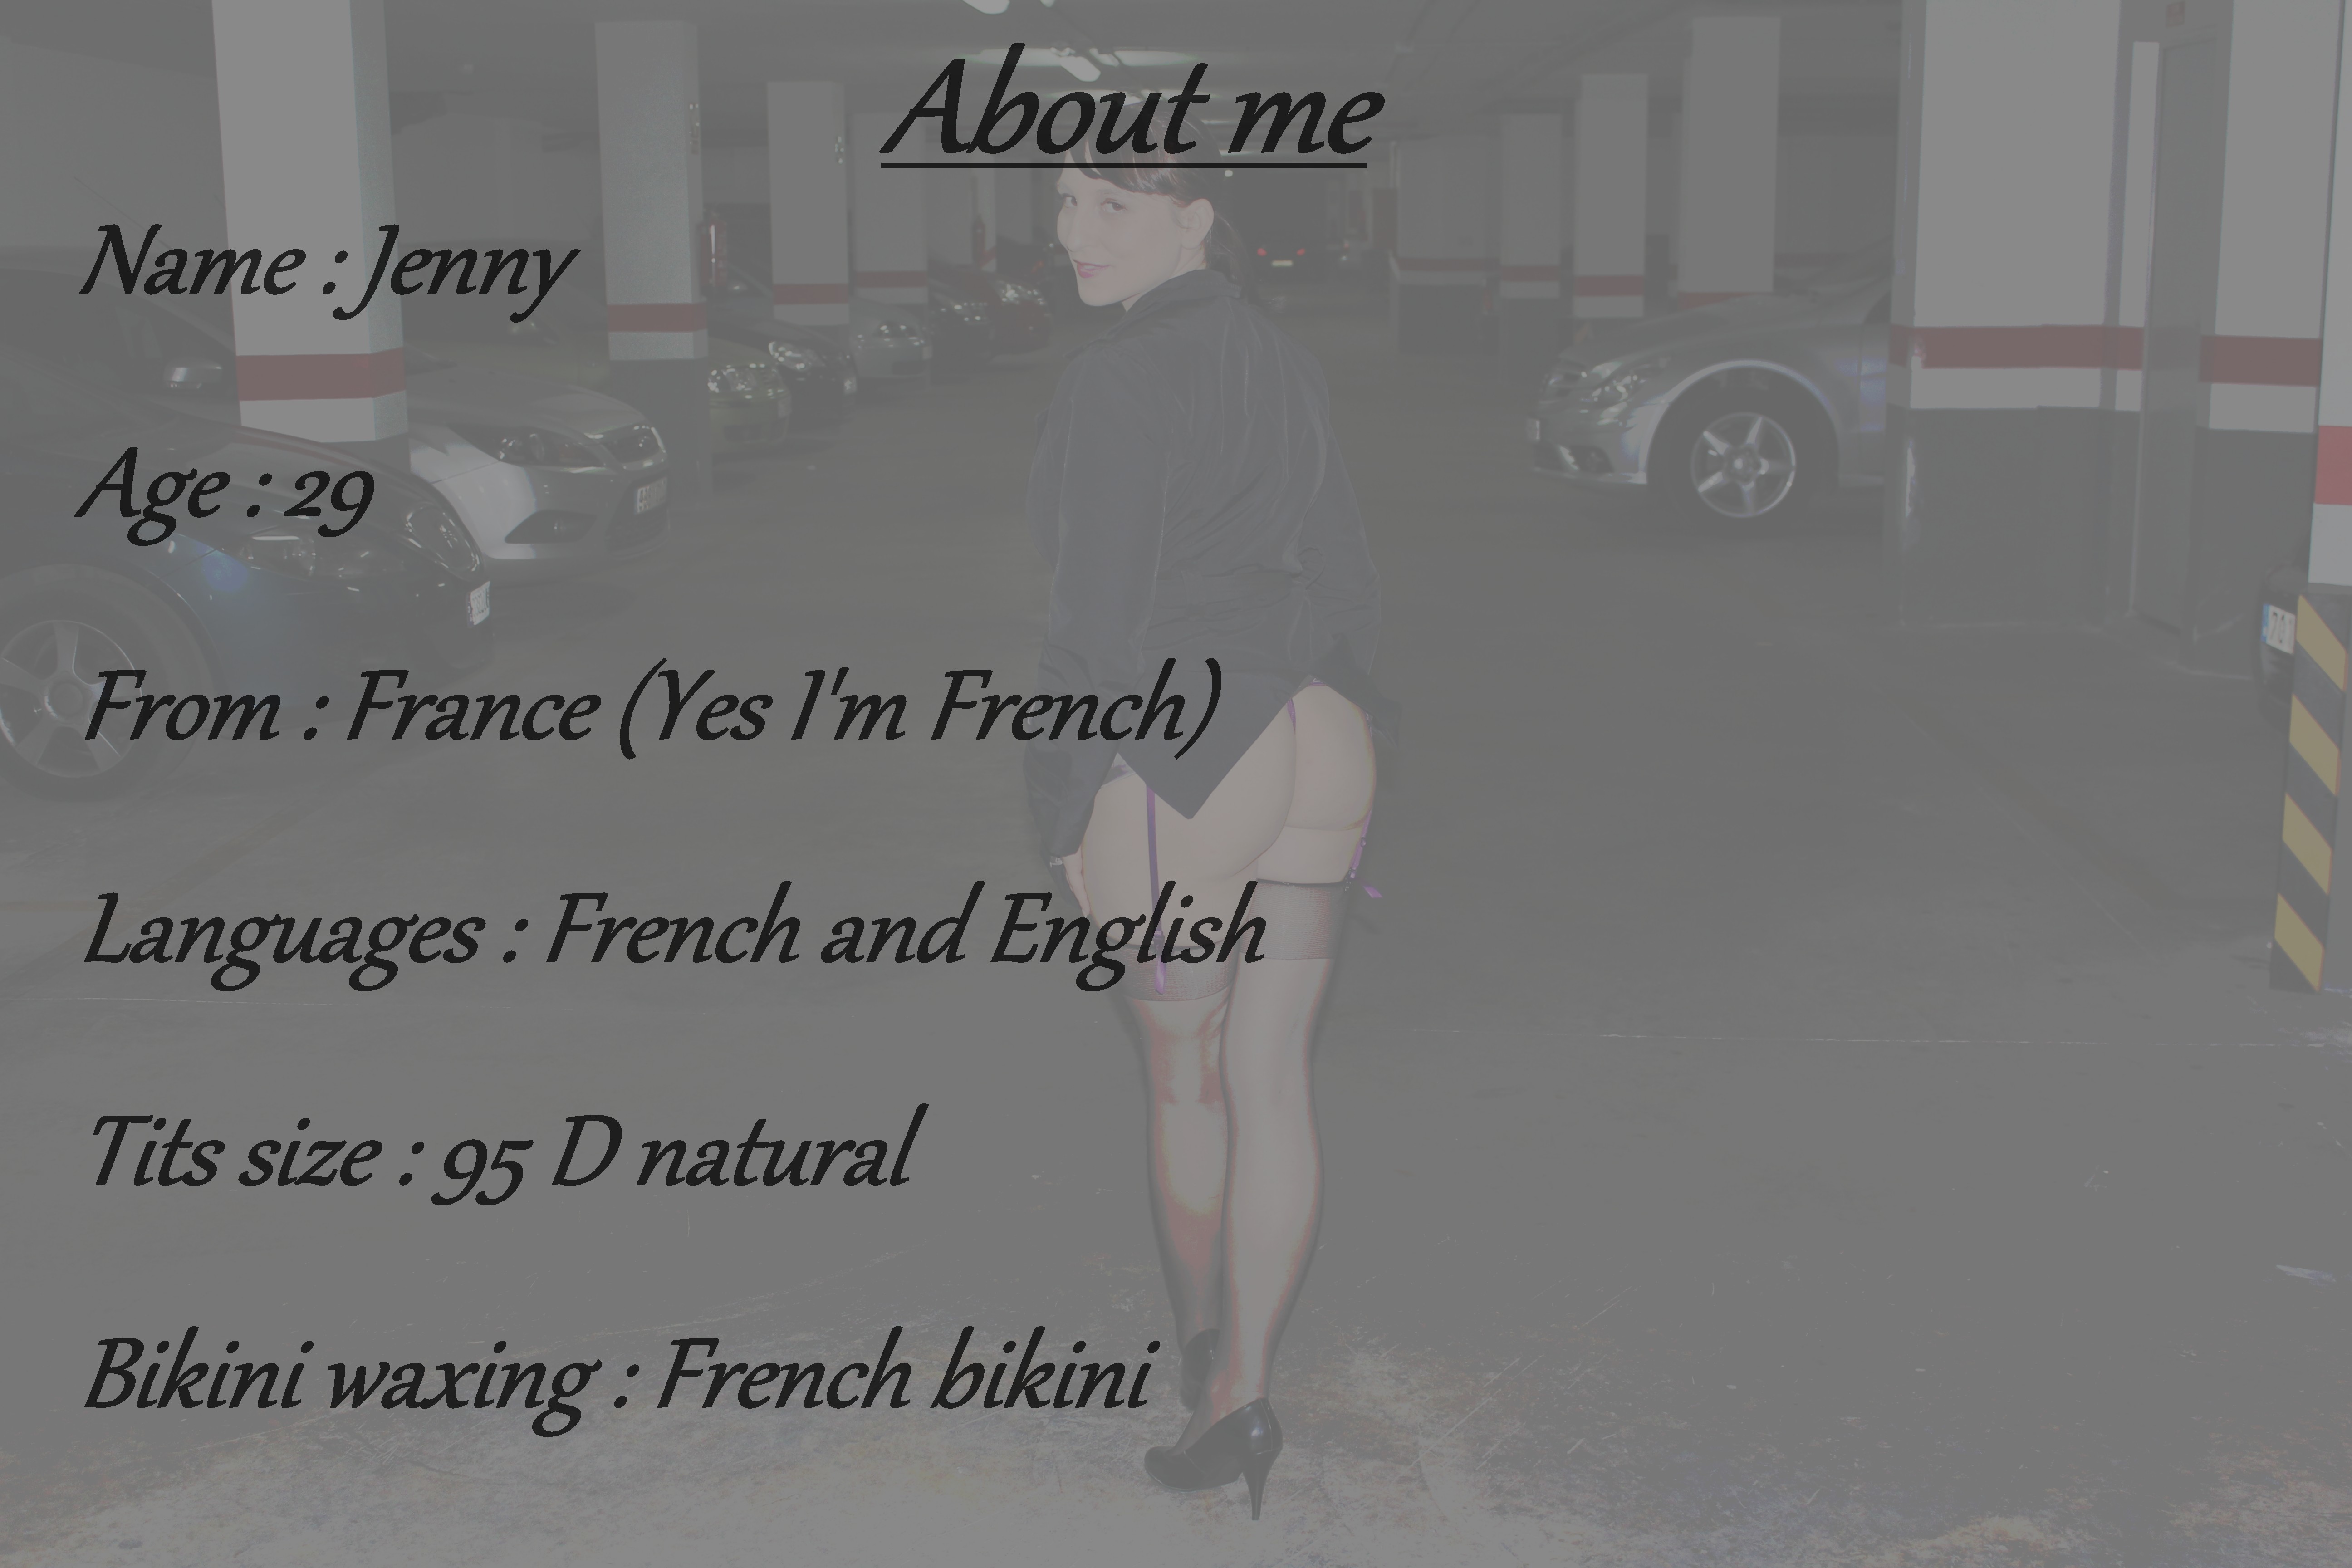 JennyCoquine About me image: 1